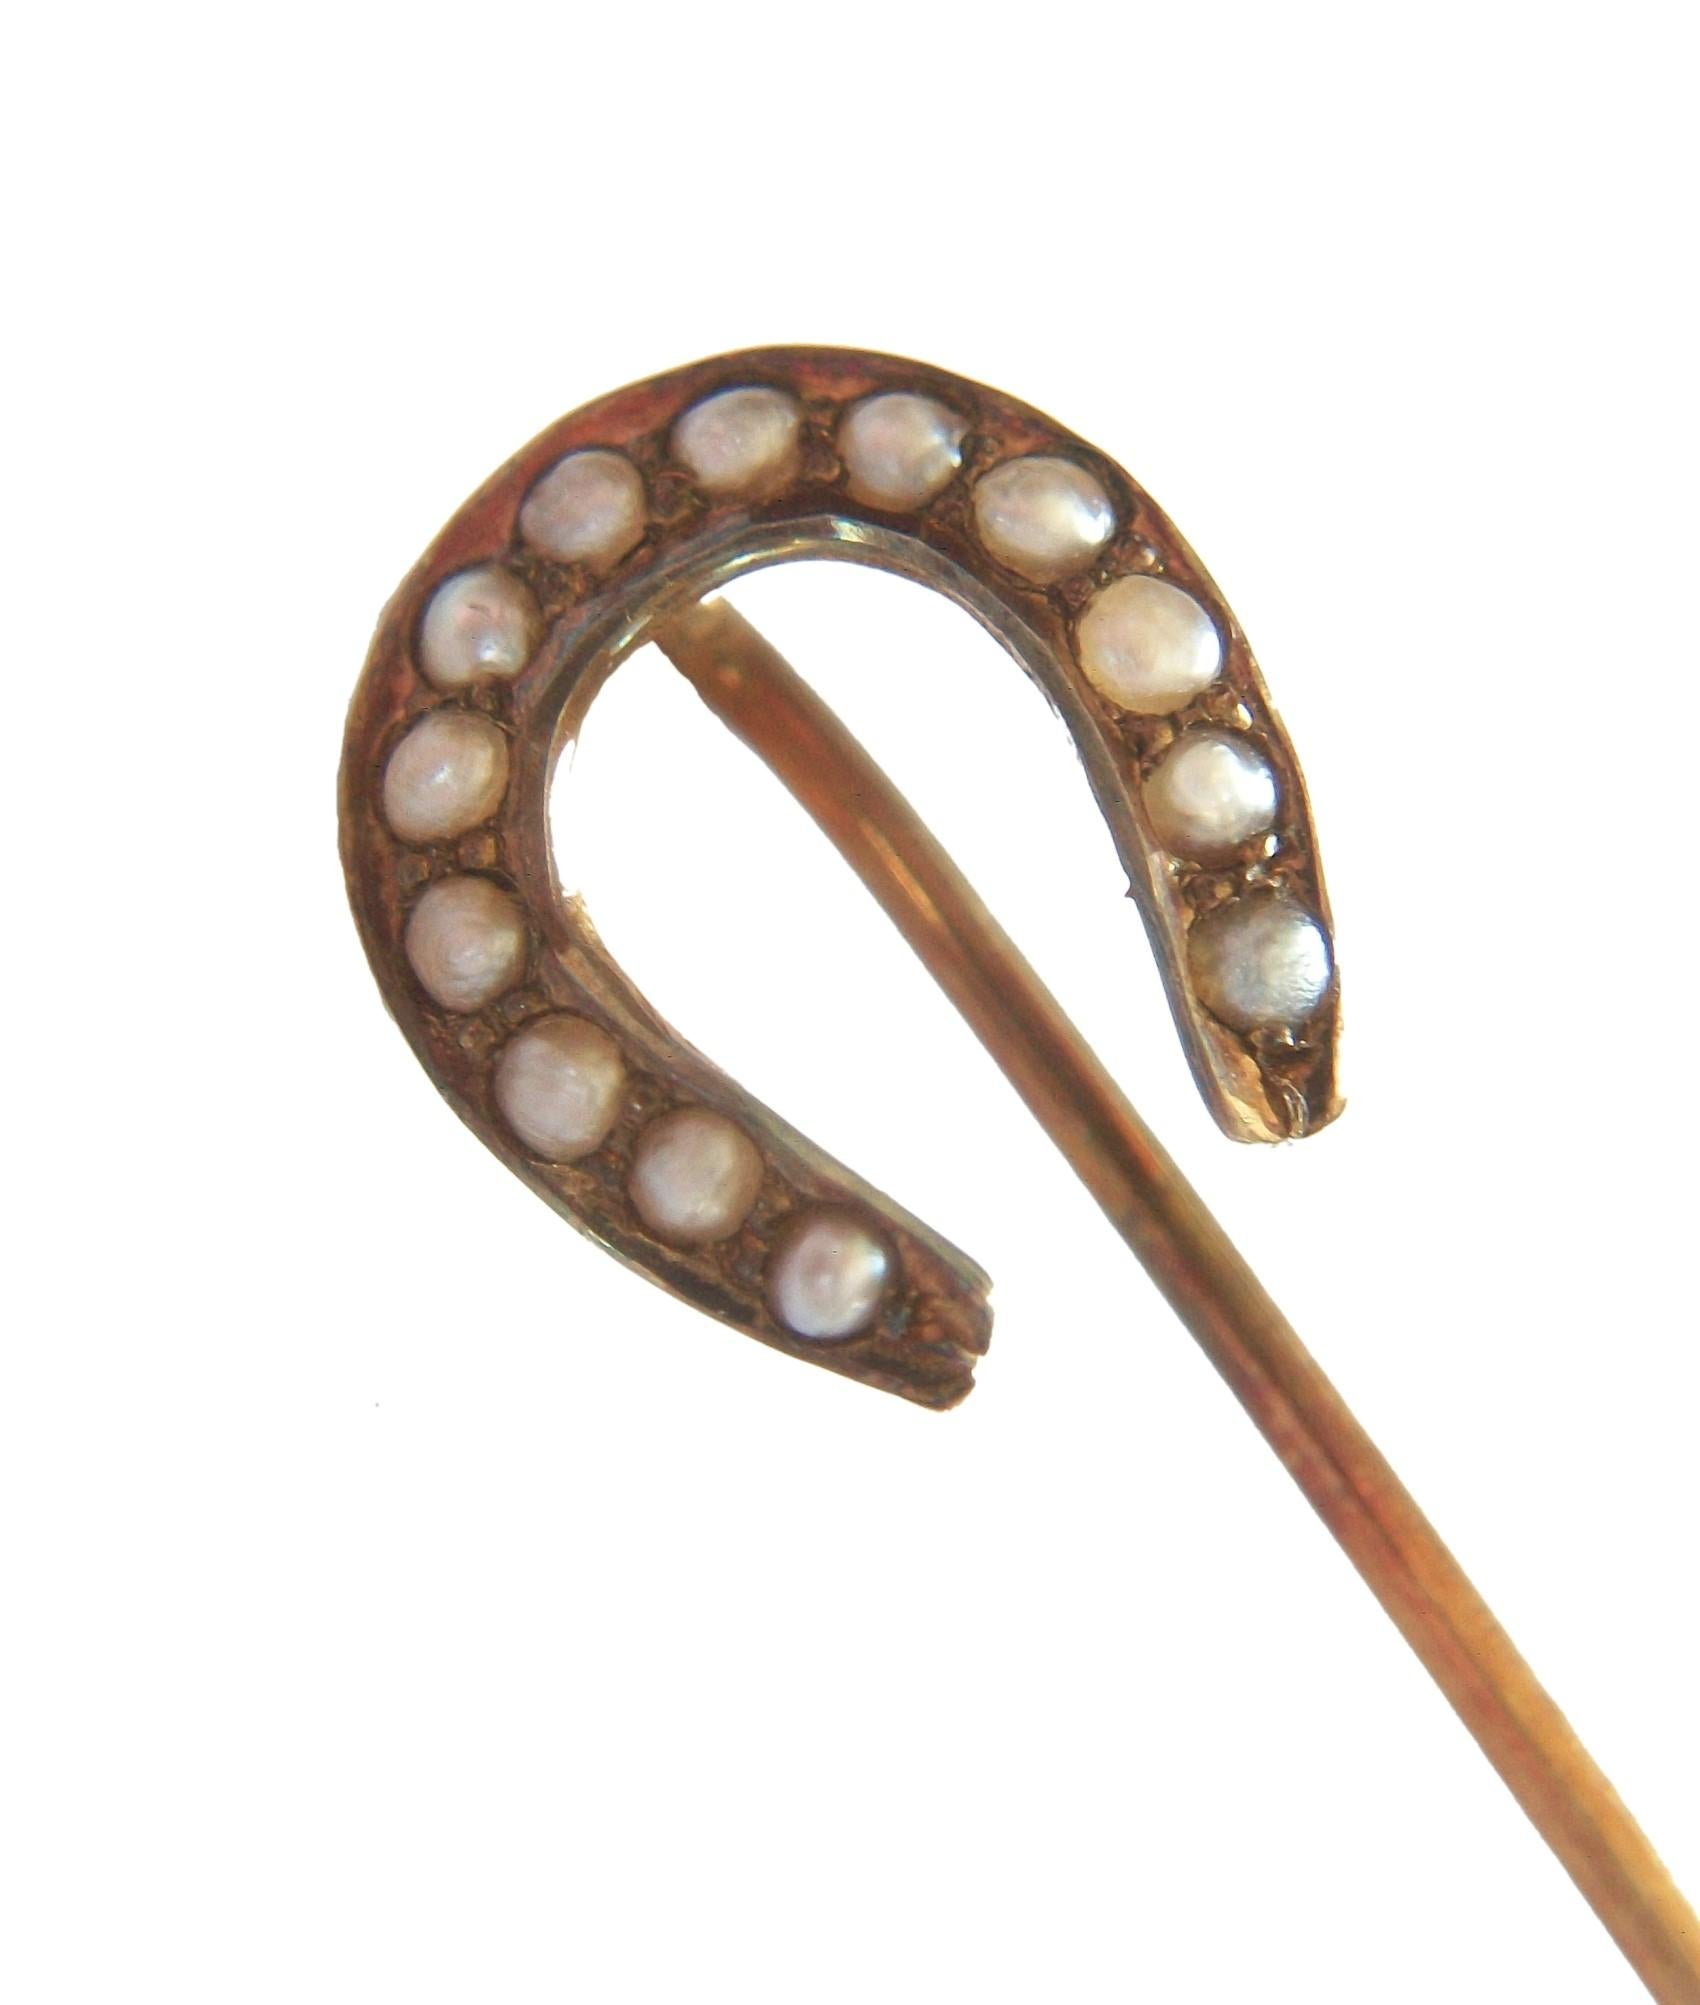 EHLERS & CO. - Victorian 14K yellow gold horseshoe stick pin - set with thirteen graduated seed pearls (1 cm. to 1.5 cm. diameter) - hand made - stamped 14K - E within a diamond hallmark - United States (New York) - circa 1900.

Excellent antique